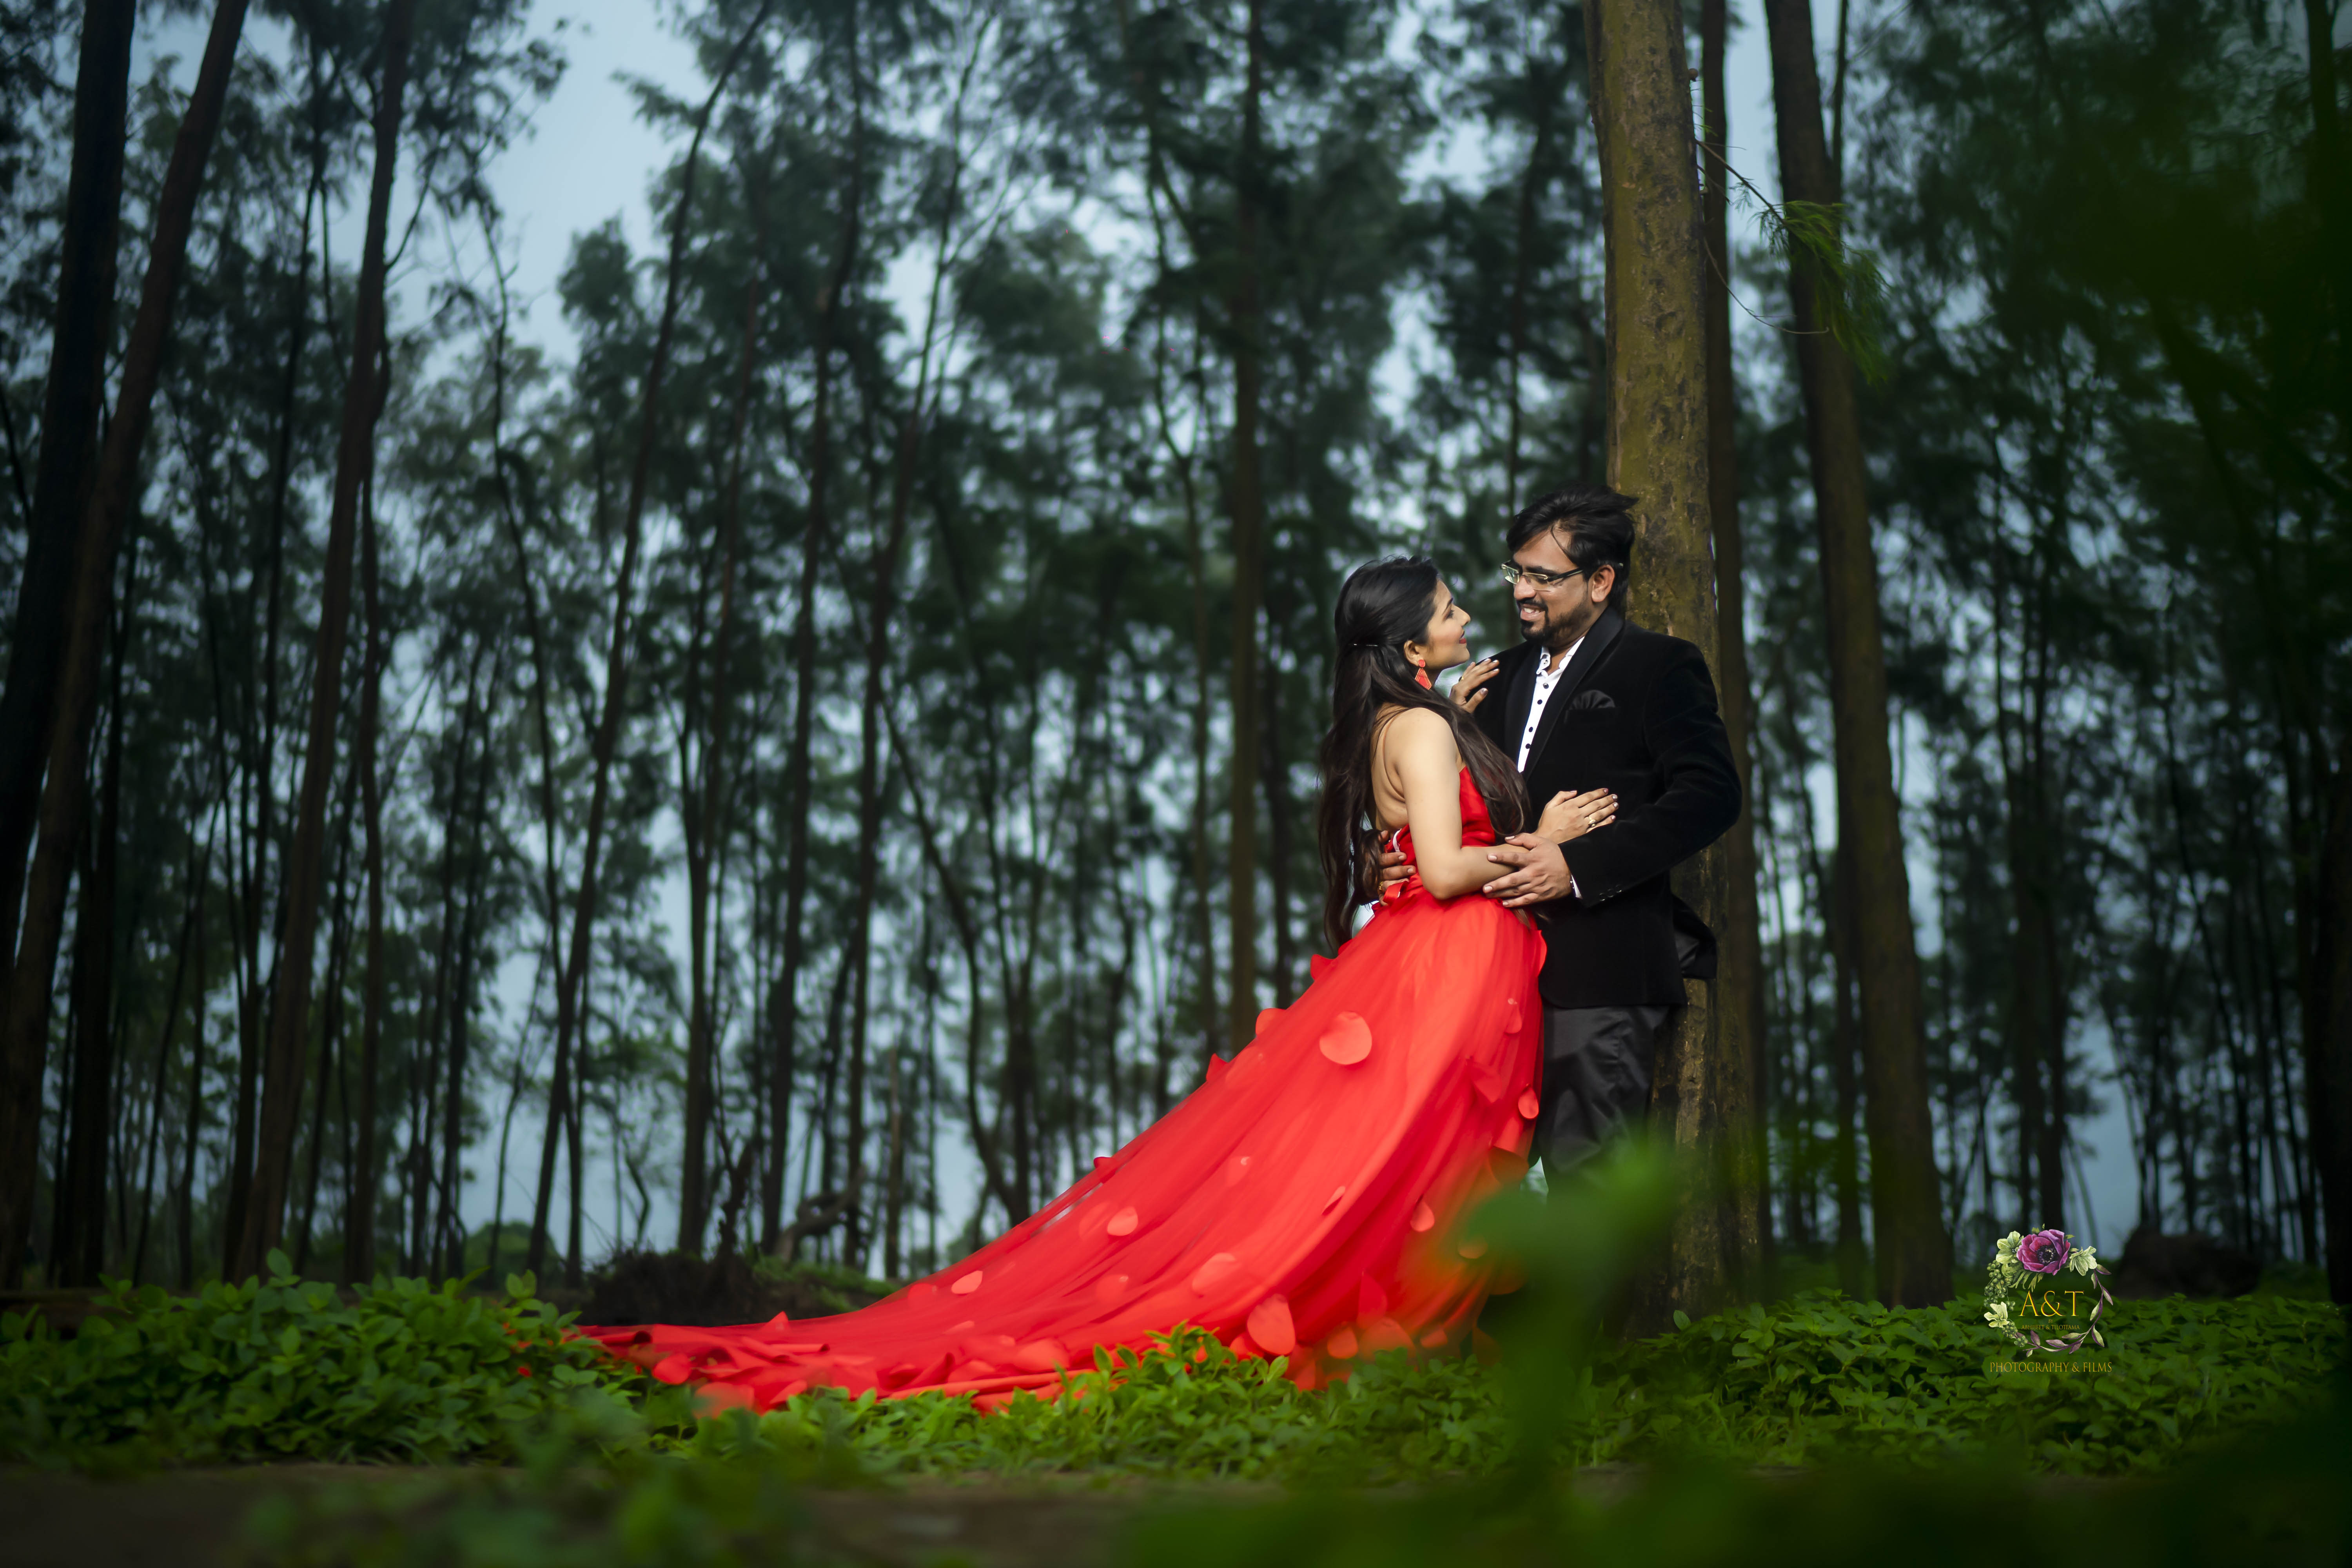 Dreamy Pre-wedding Photoshoot of Dr Rajani and Dr Umesh in Beautiful Gown and Blazer by Best Wedding Photographer in Pune